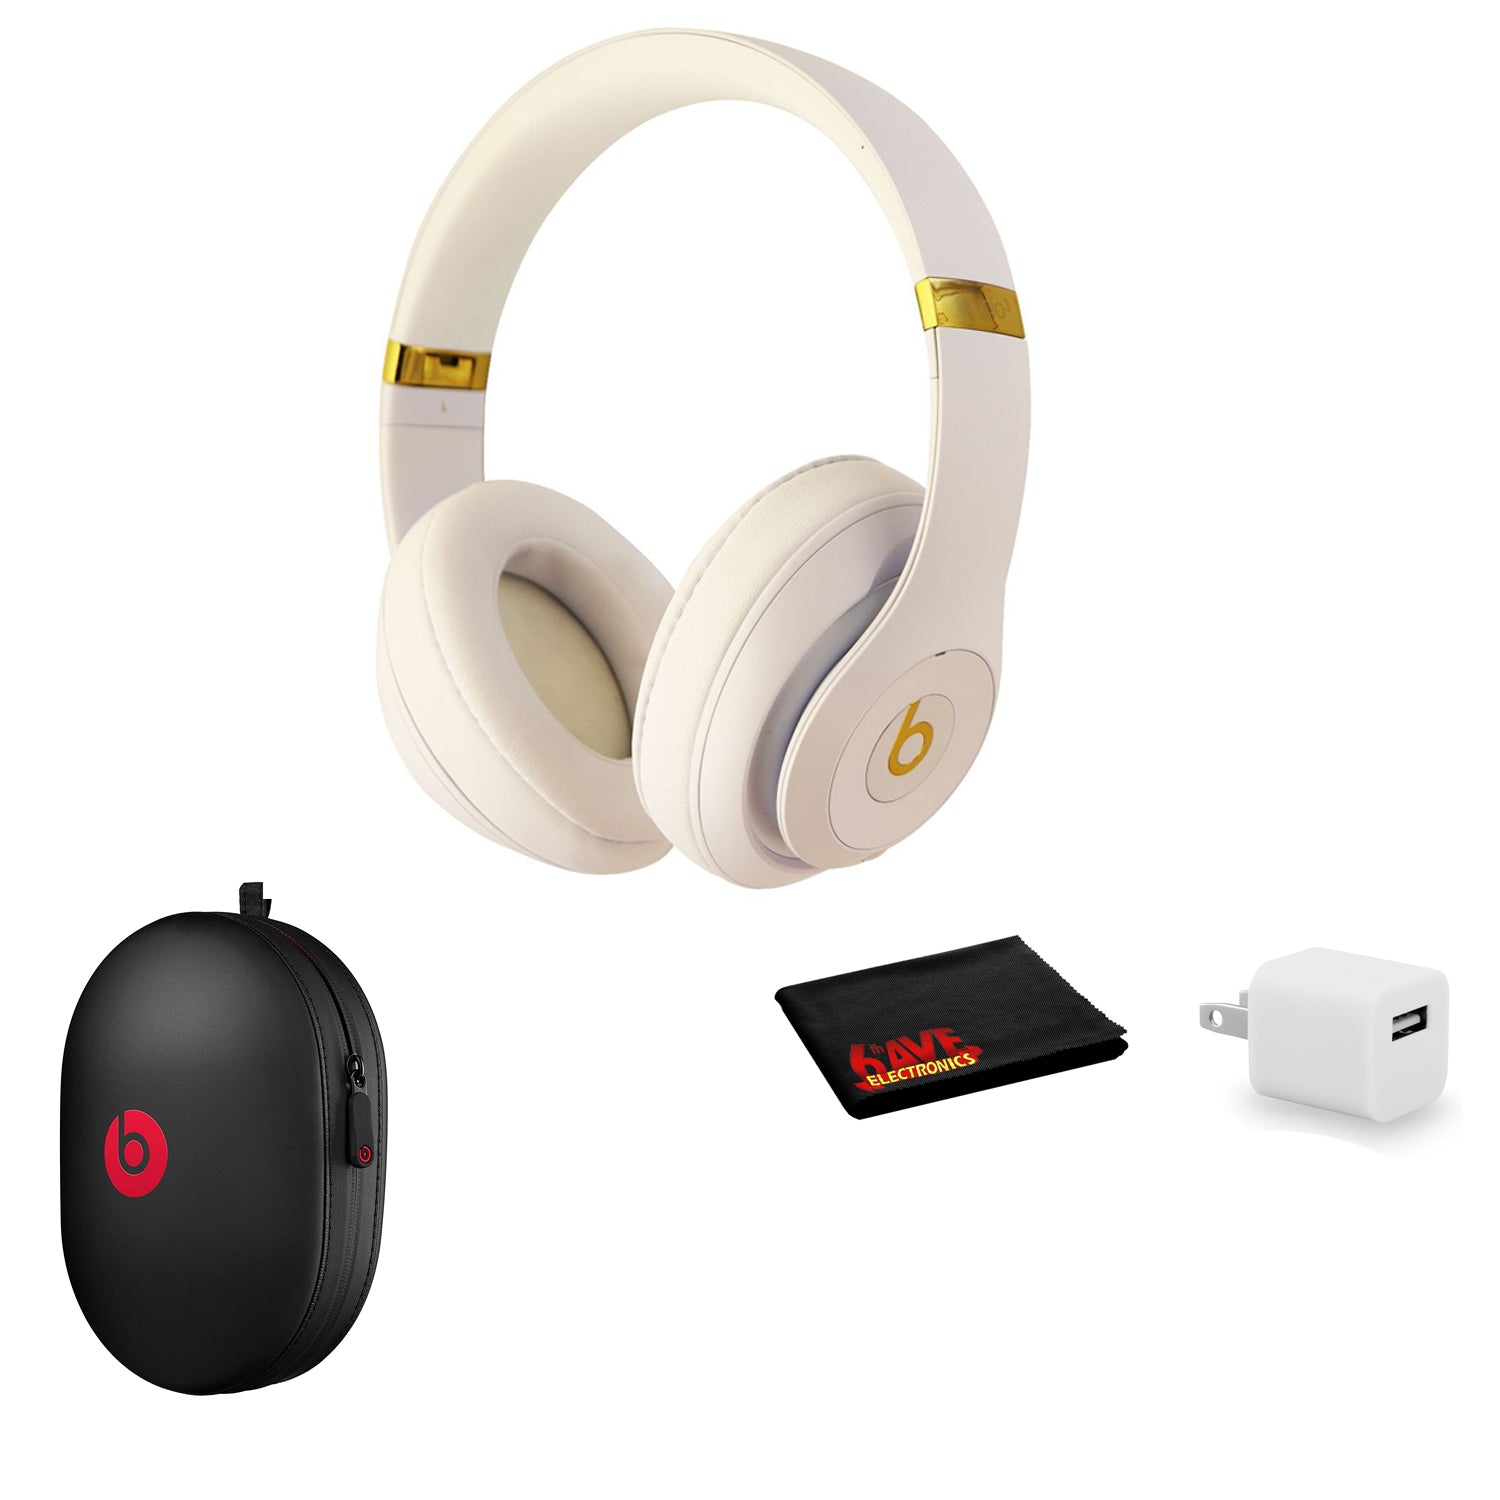 Beats Studio3 Wireless Series Over-Ear Headphones - Matte White/Gold (MQ572LL/A) Kit with USB adapter